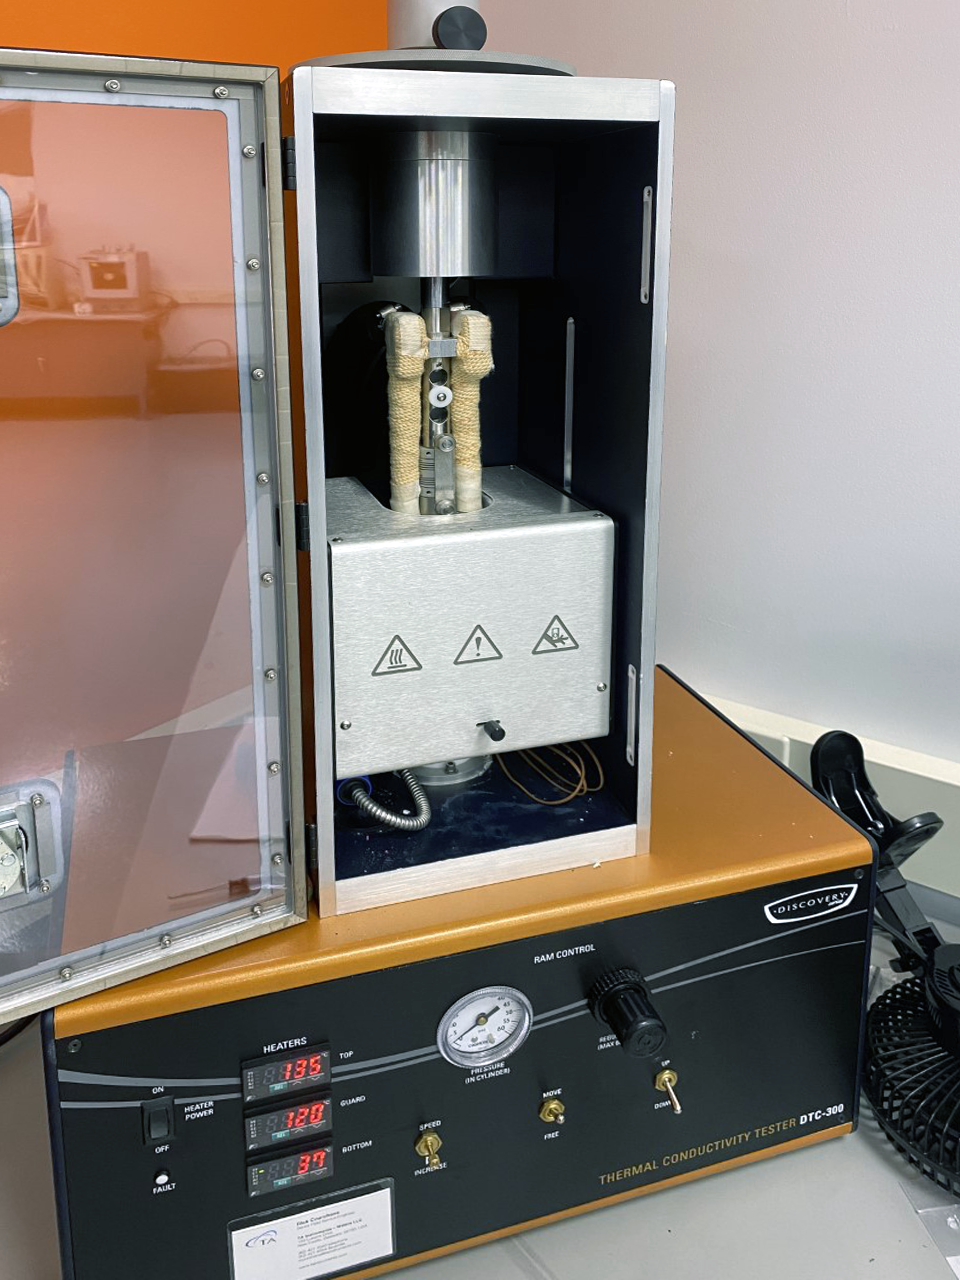 Our TA Instruments DTC 300 used in material testing